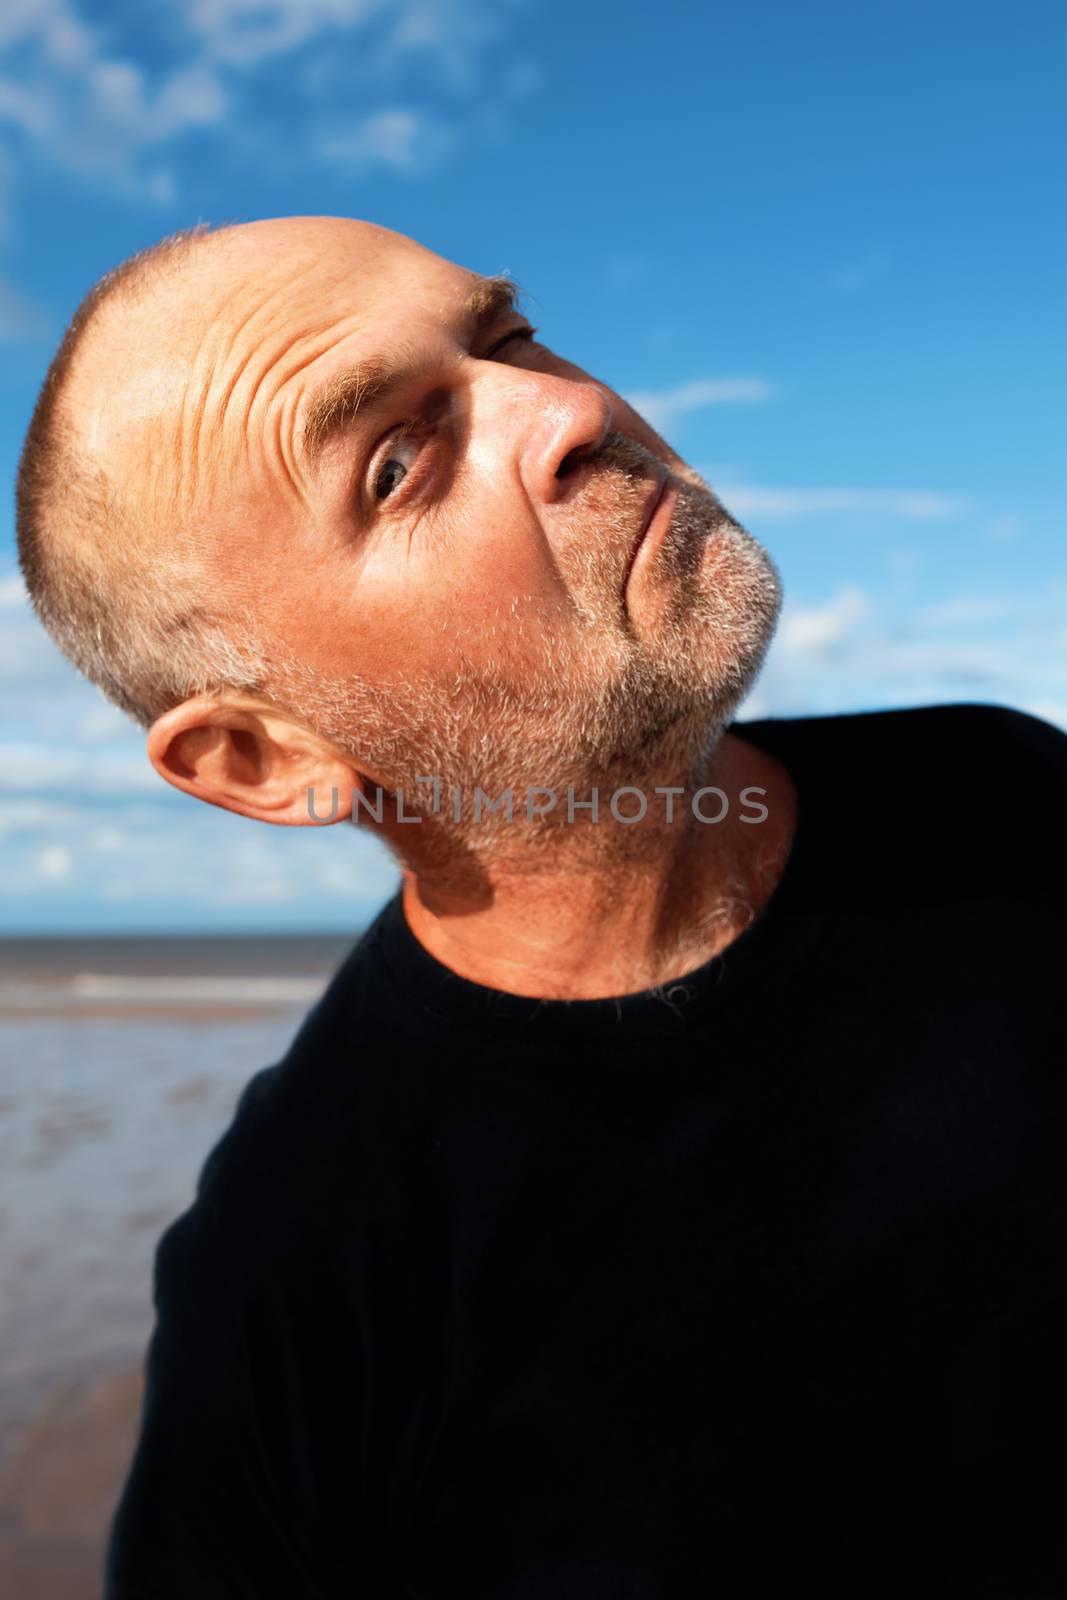 the man in black t-shirt winking and looking into the camera at the seaside